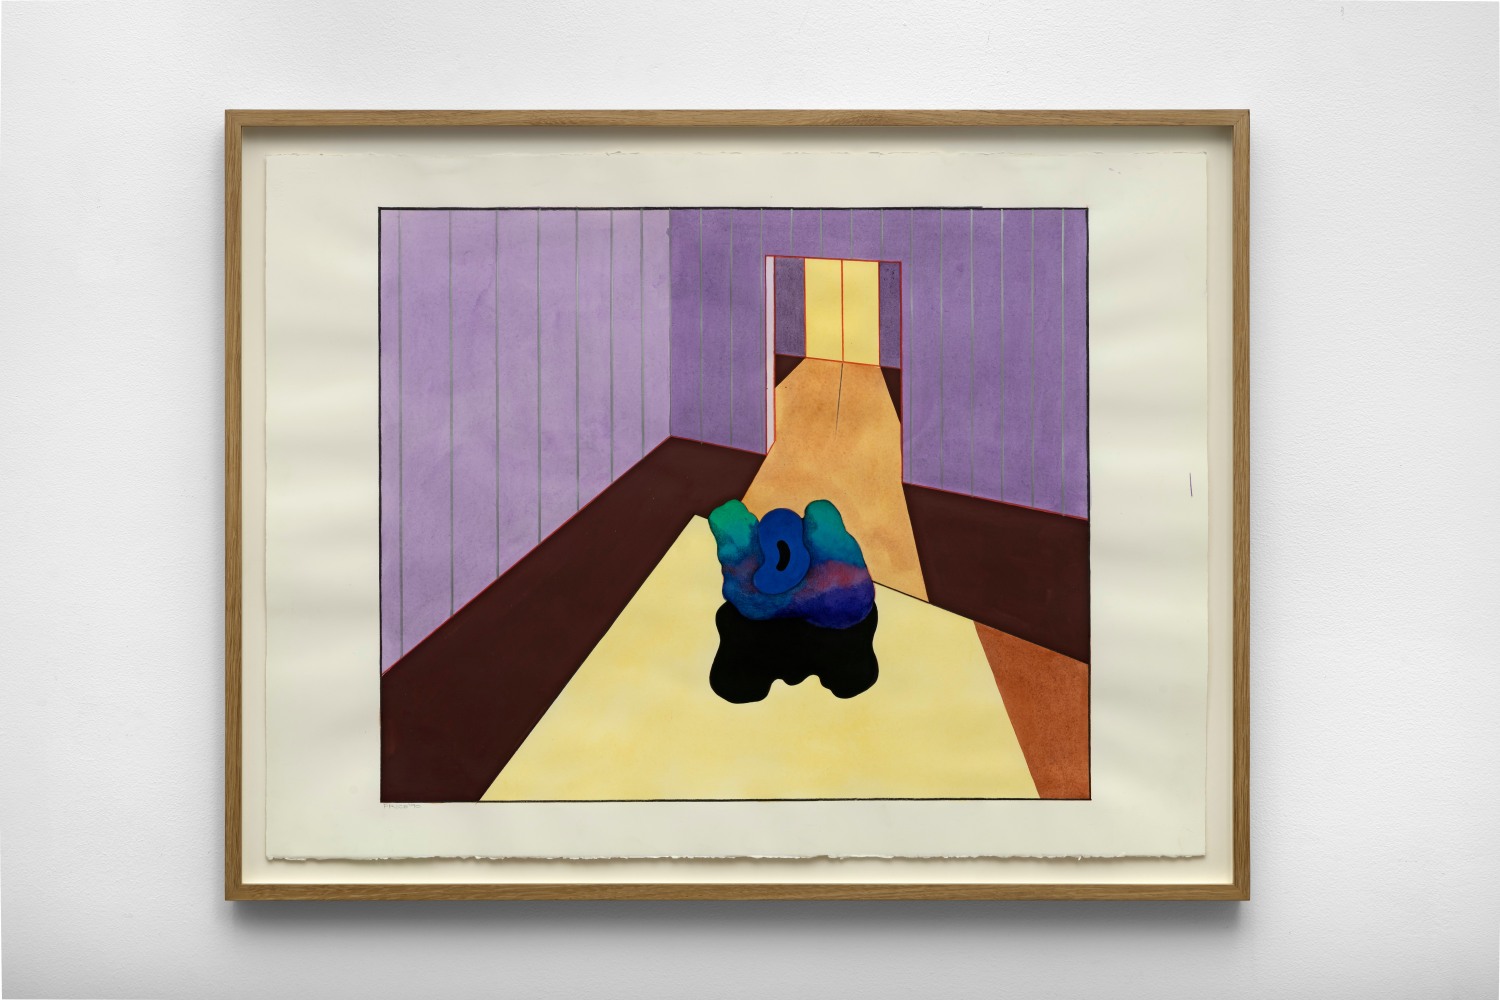 Purple Interior with Sculpture, 1990 watercolor on paper 22 1/2 x 30 inches; 57.1 x 76.2 centimeters LSFA# 15062